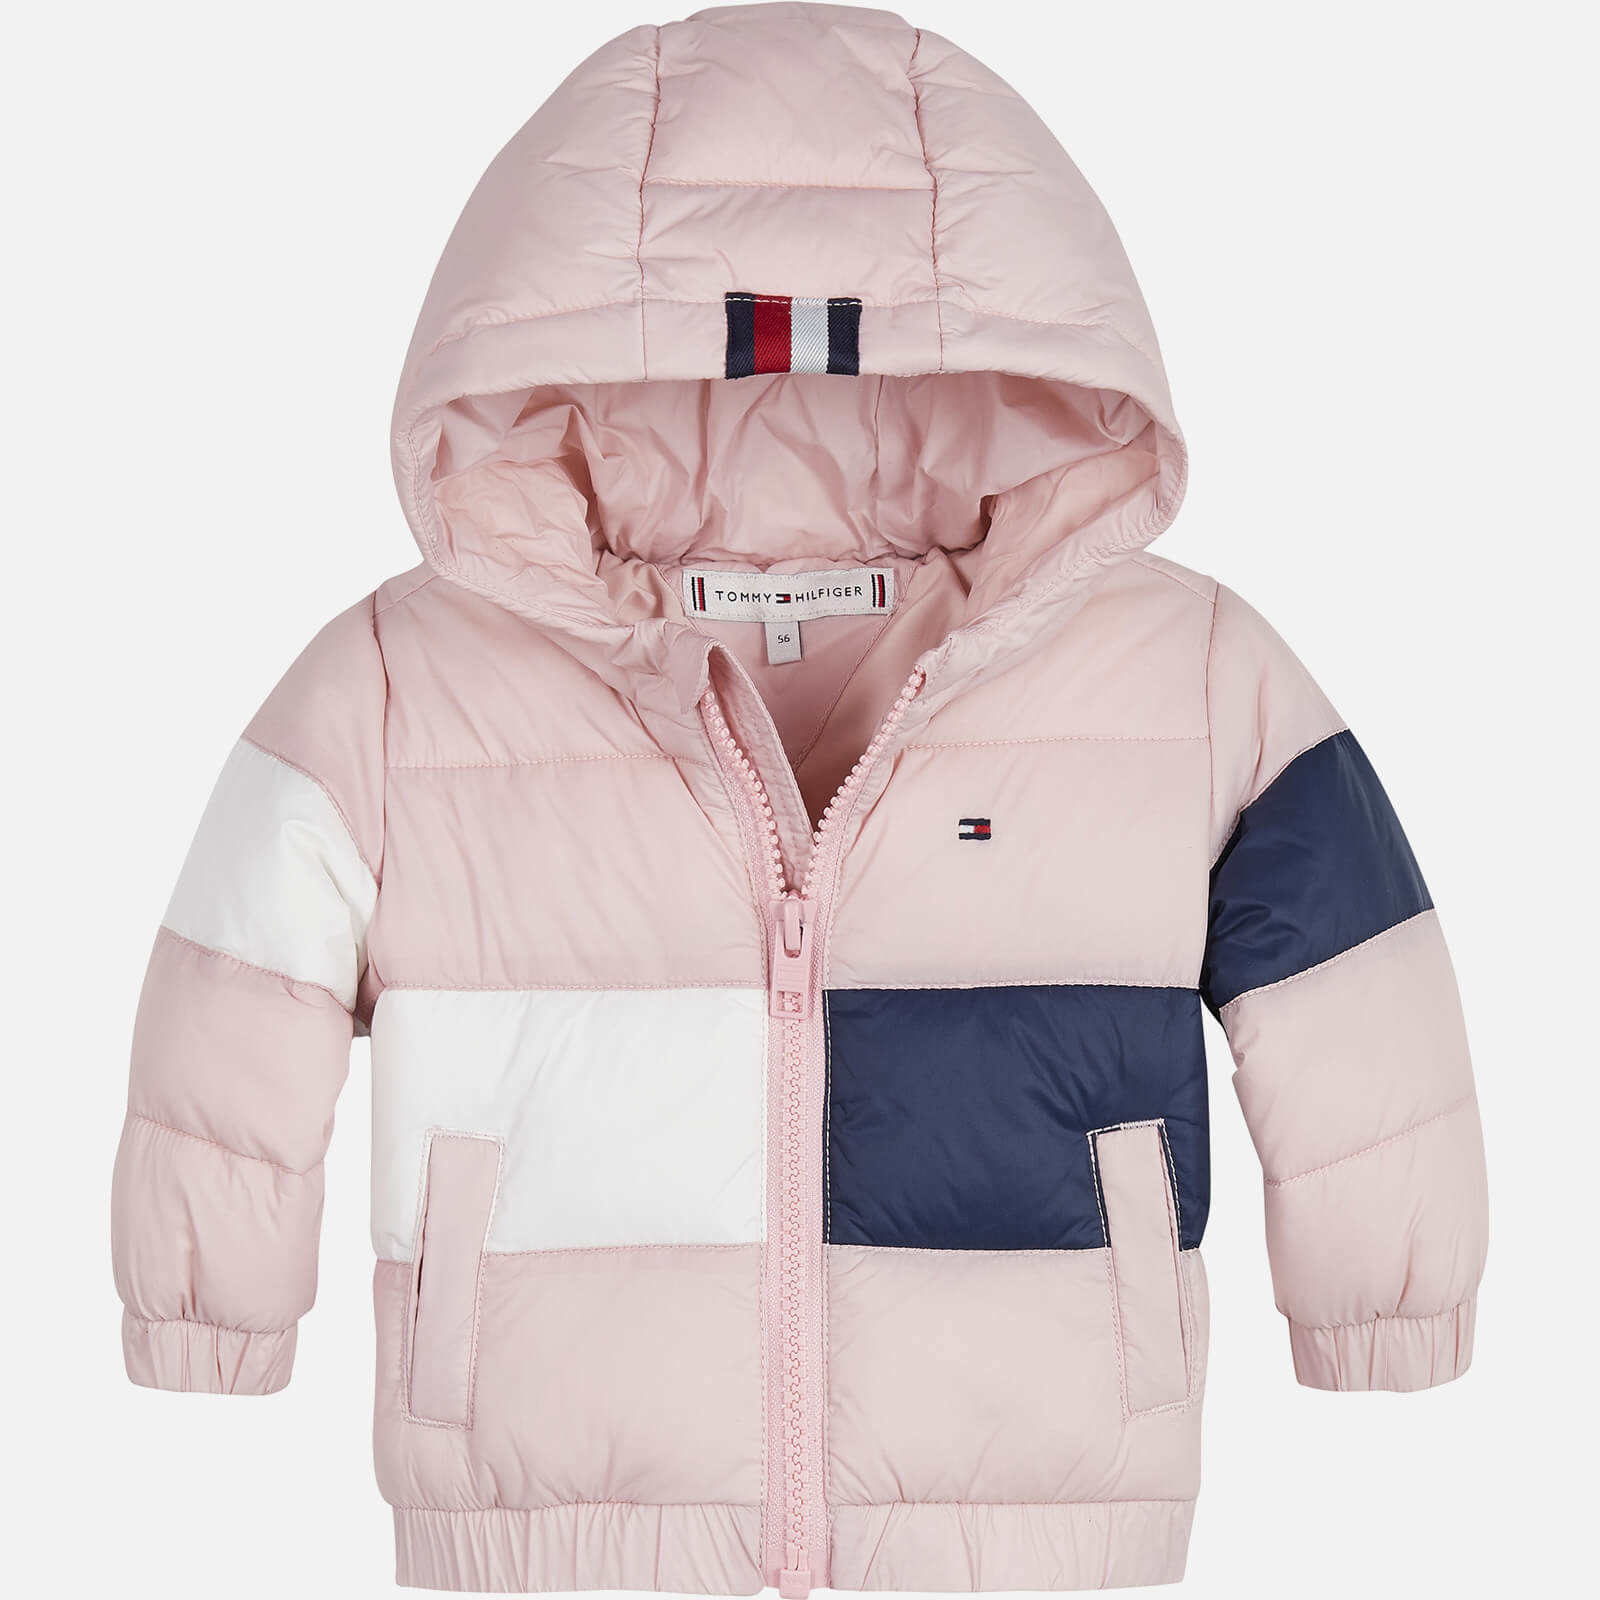 Tommy Hilfiger Baby Colourblock Puffer Coat - Delicate Pink - 6-9 months